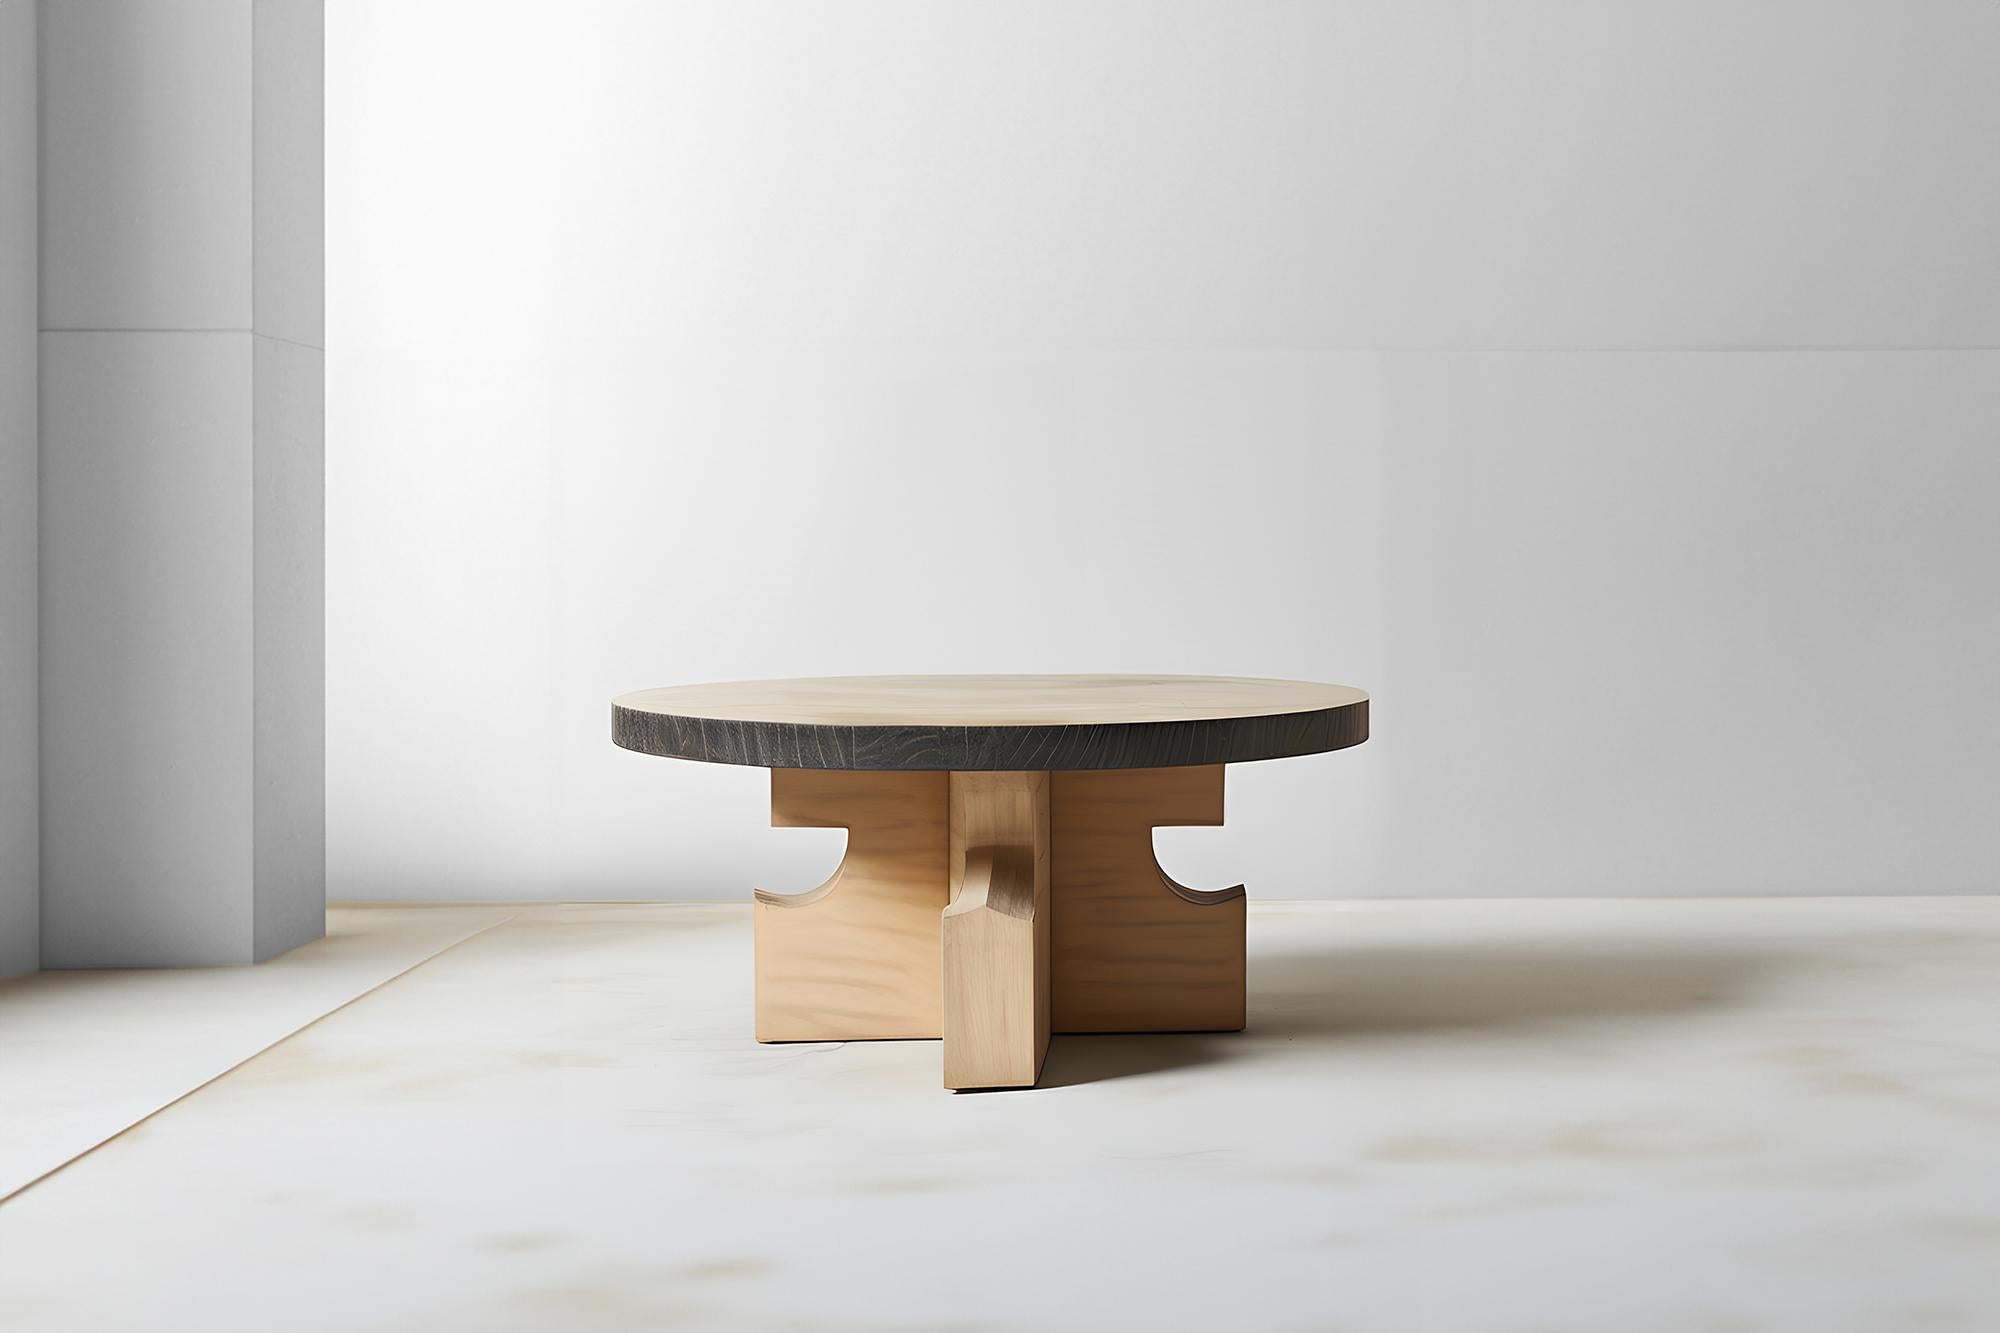 Round Oak Fundamenta Table 63 Geometric Flair, Contemporary Look by NONO

Sculptural coffee table made of solid wood with a natural water-based or black tinted finish. Due to the nature of the production process, each piece may vary in grain,